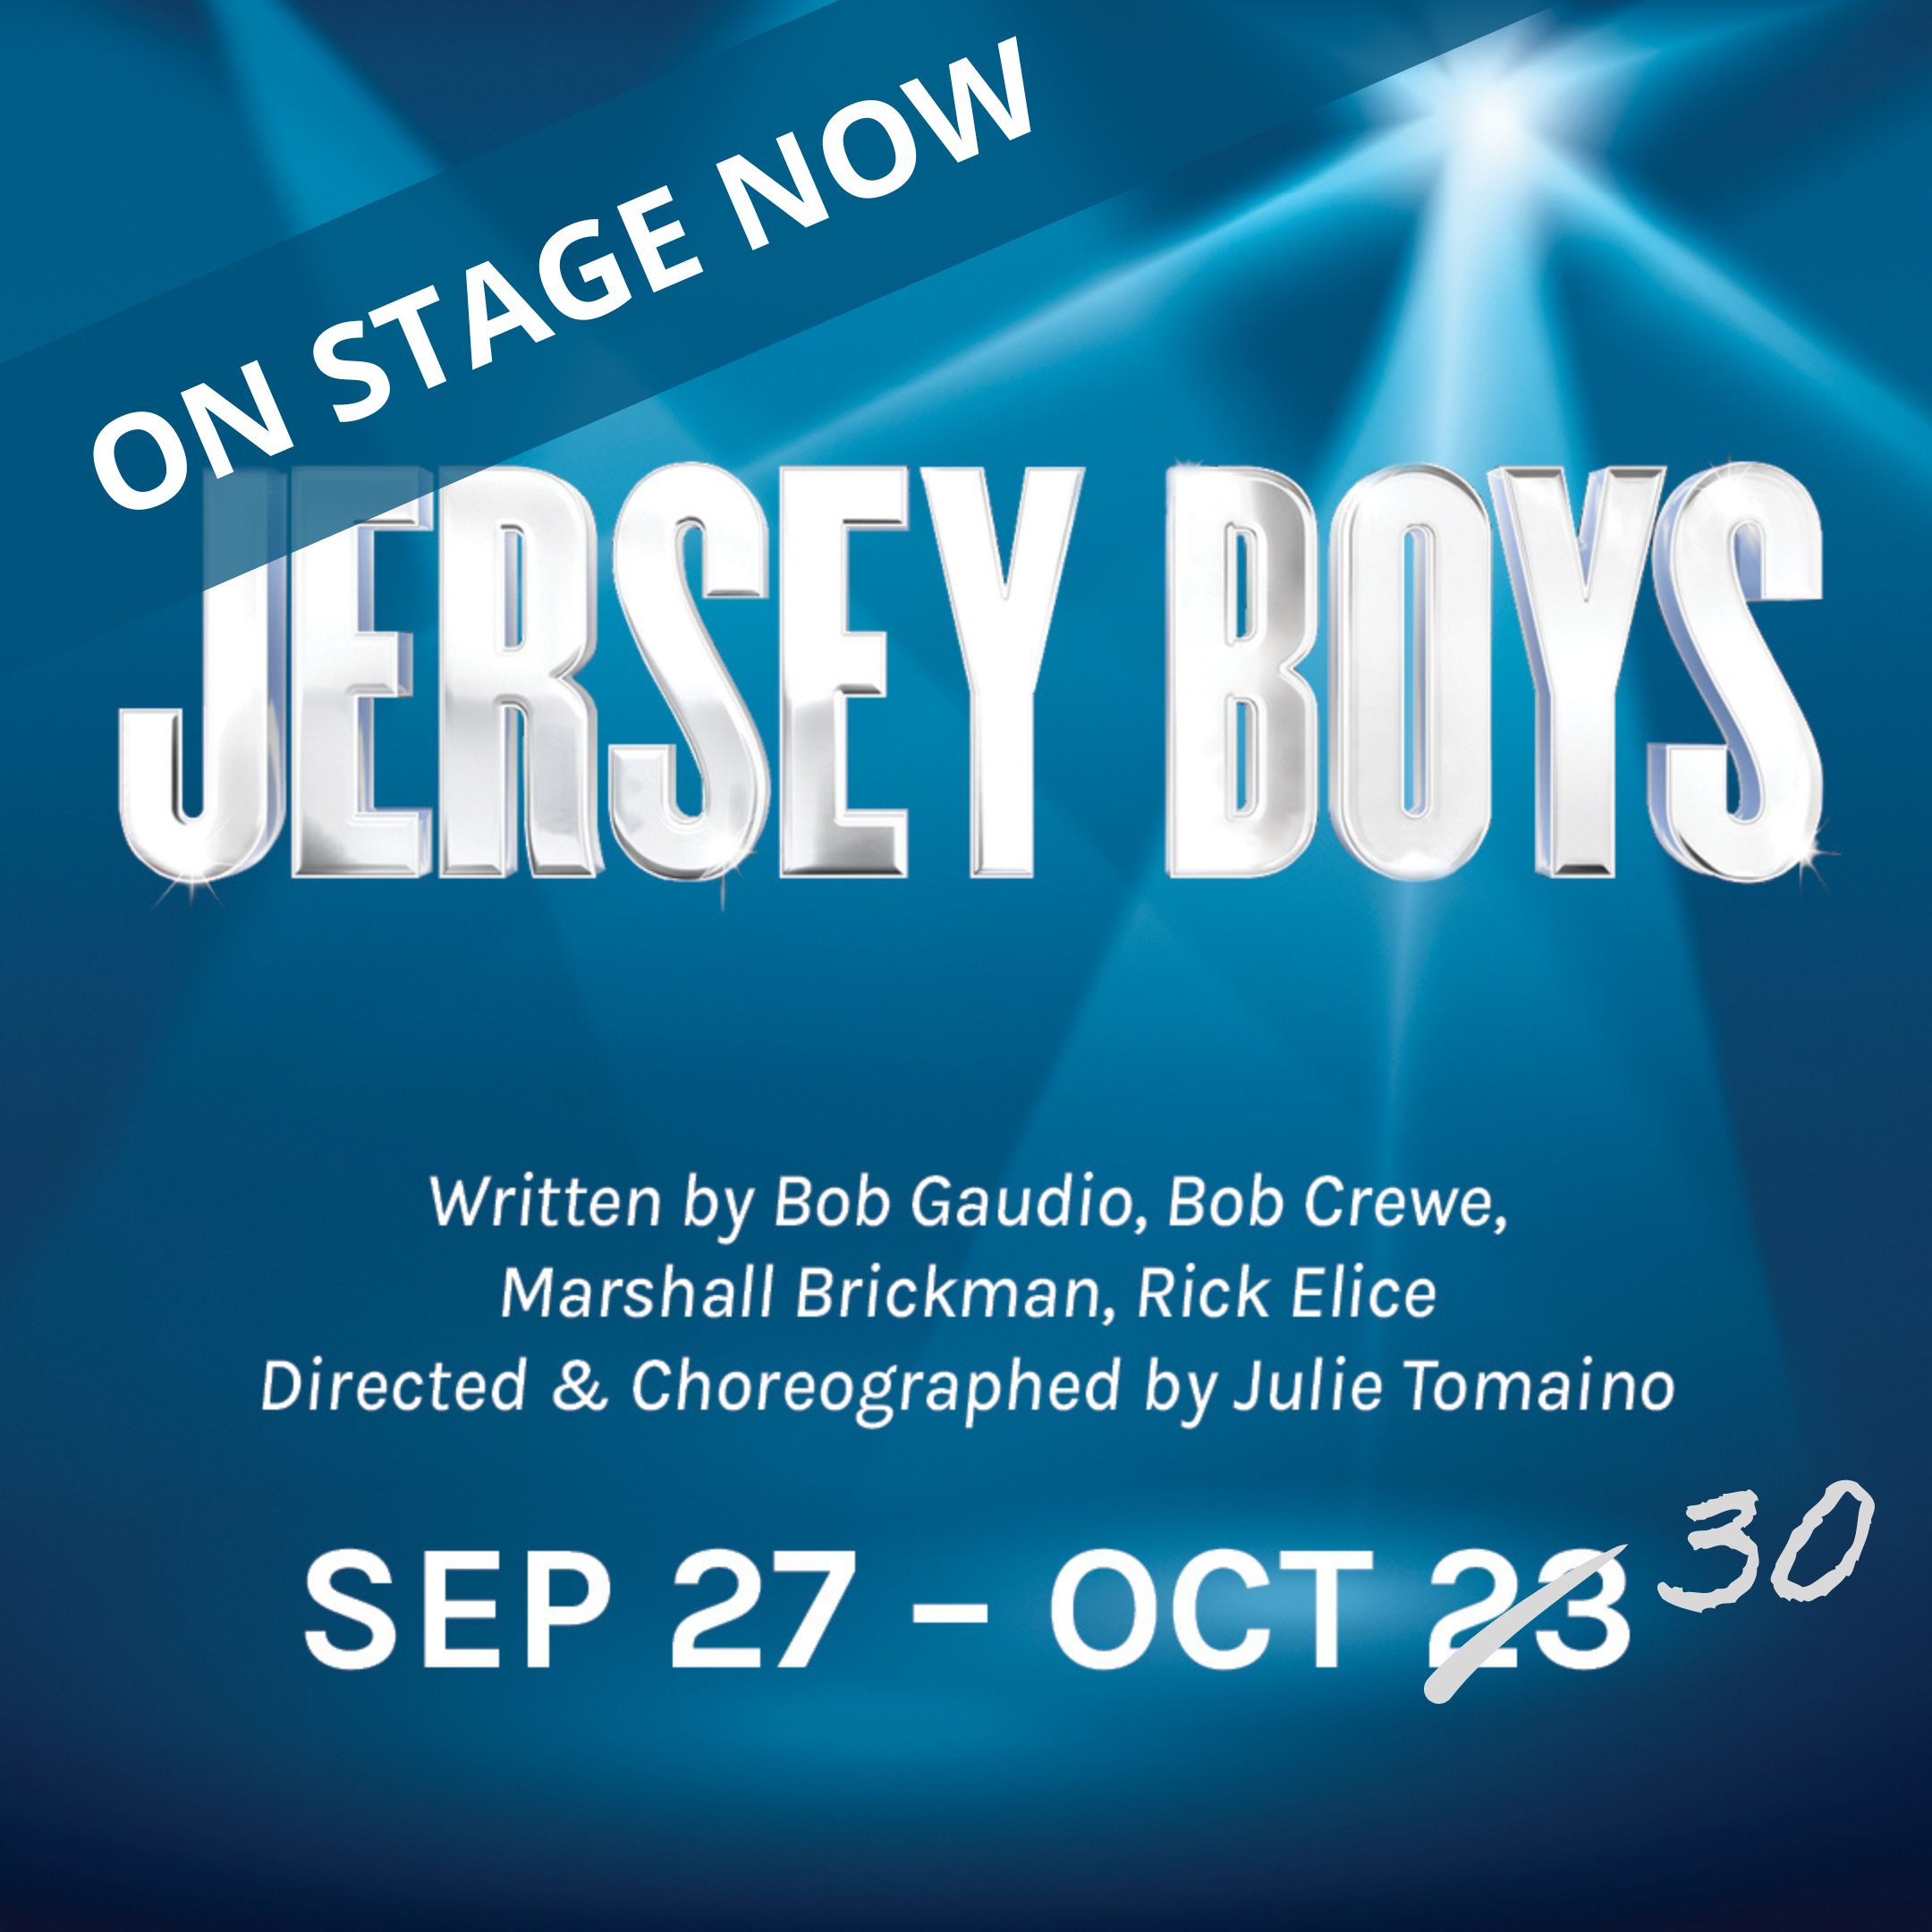 A blue background with a spotlight. Text reads 'ON STAGE NOW JERSEY BOYS,' 'Written by Bob Gaudio, Bob Crewe, Marshall Brickman, Rick Elice,' 'Directed & Choreographed by Julie Tomaino,' SEP 27 - OCT 23' with 23 crossed out and a '30' to replace it.